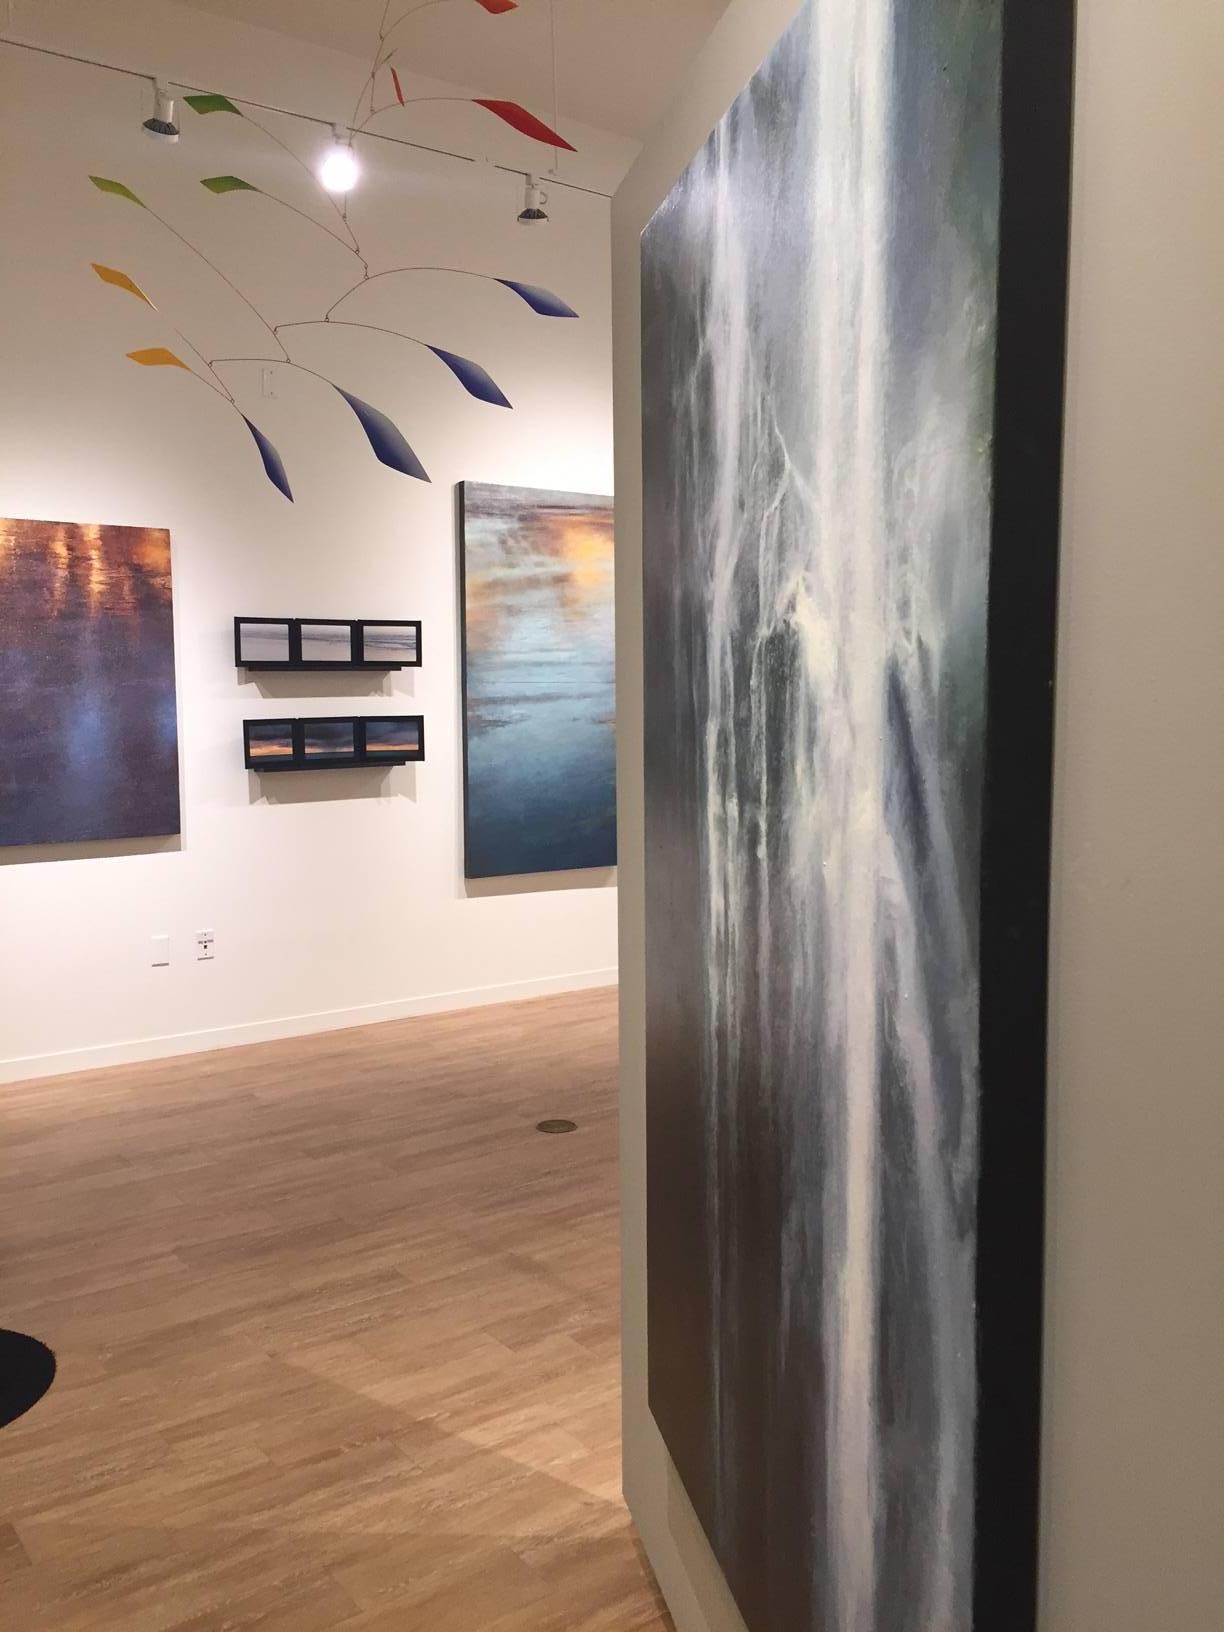 Dramatic waterfall from Gail Chase Bien, who paints thinly layered oil on linen over extended periods (from months to years) to complete a single work of art. Taking cues from nature’s extraordinary visual offerings — specifically, the play of light